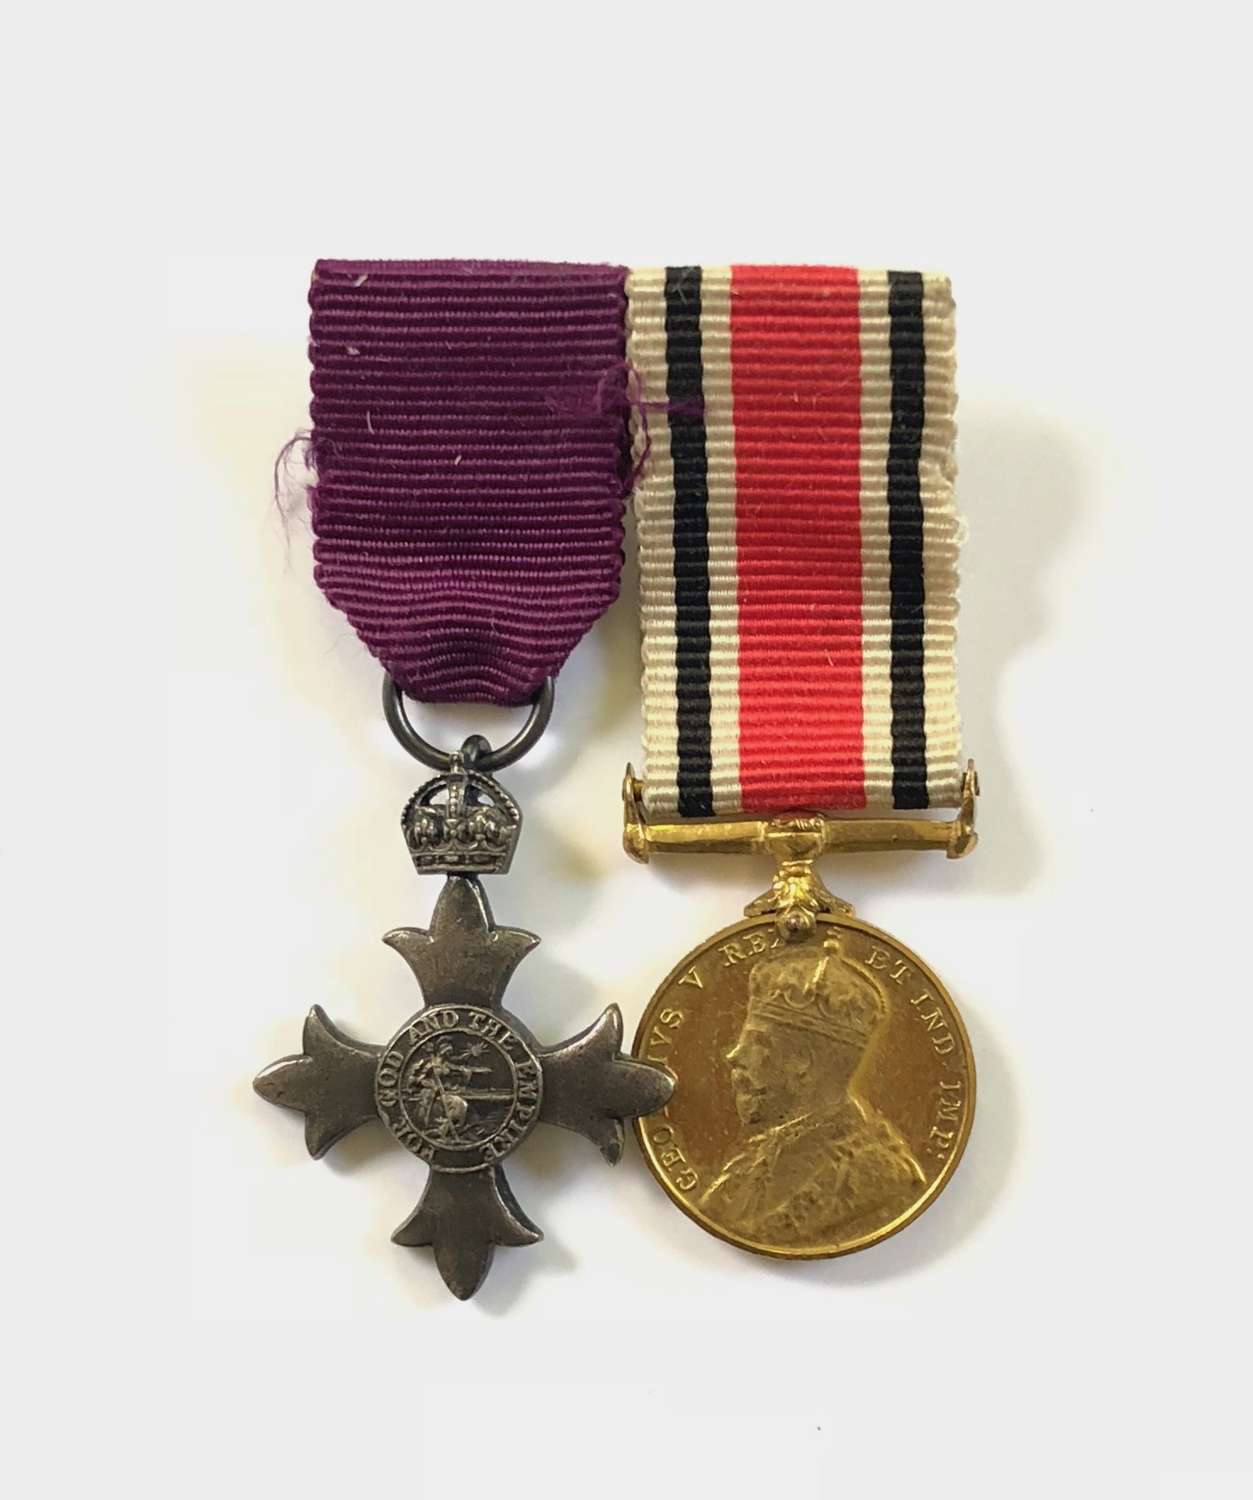 MBE Police Special Constabulary MINIATURE Medal Pair.